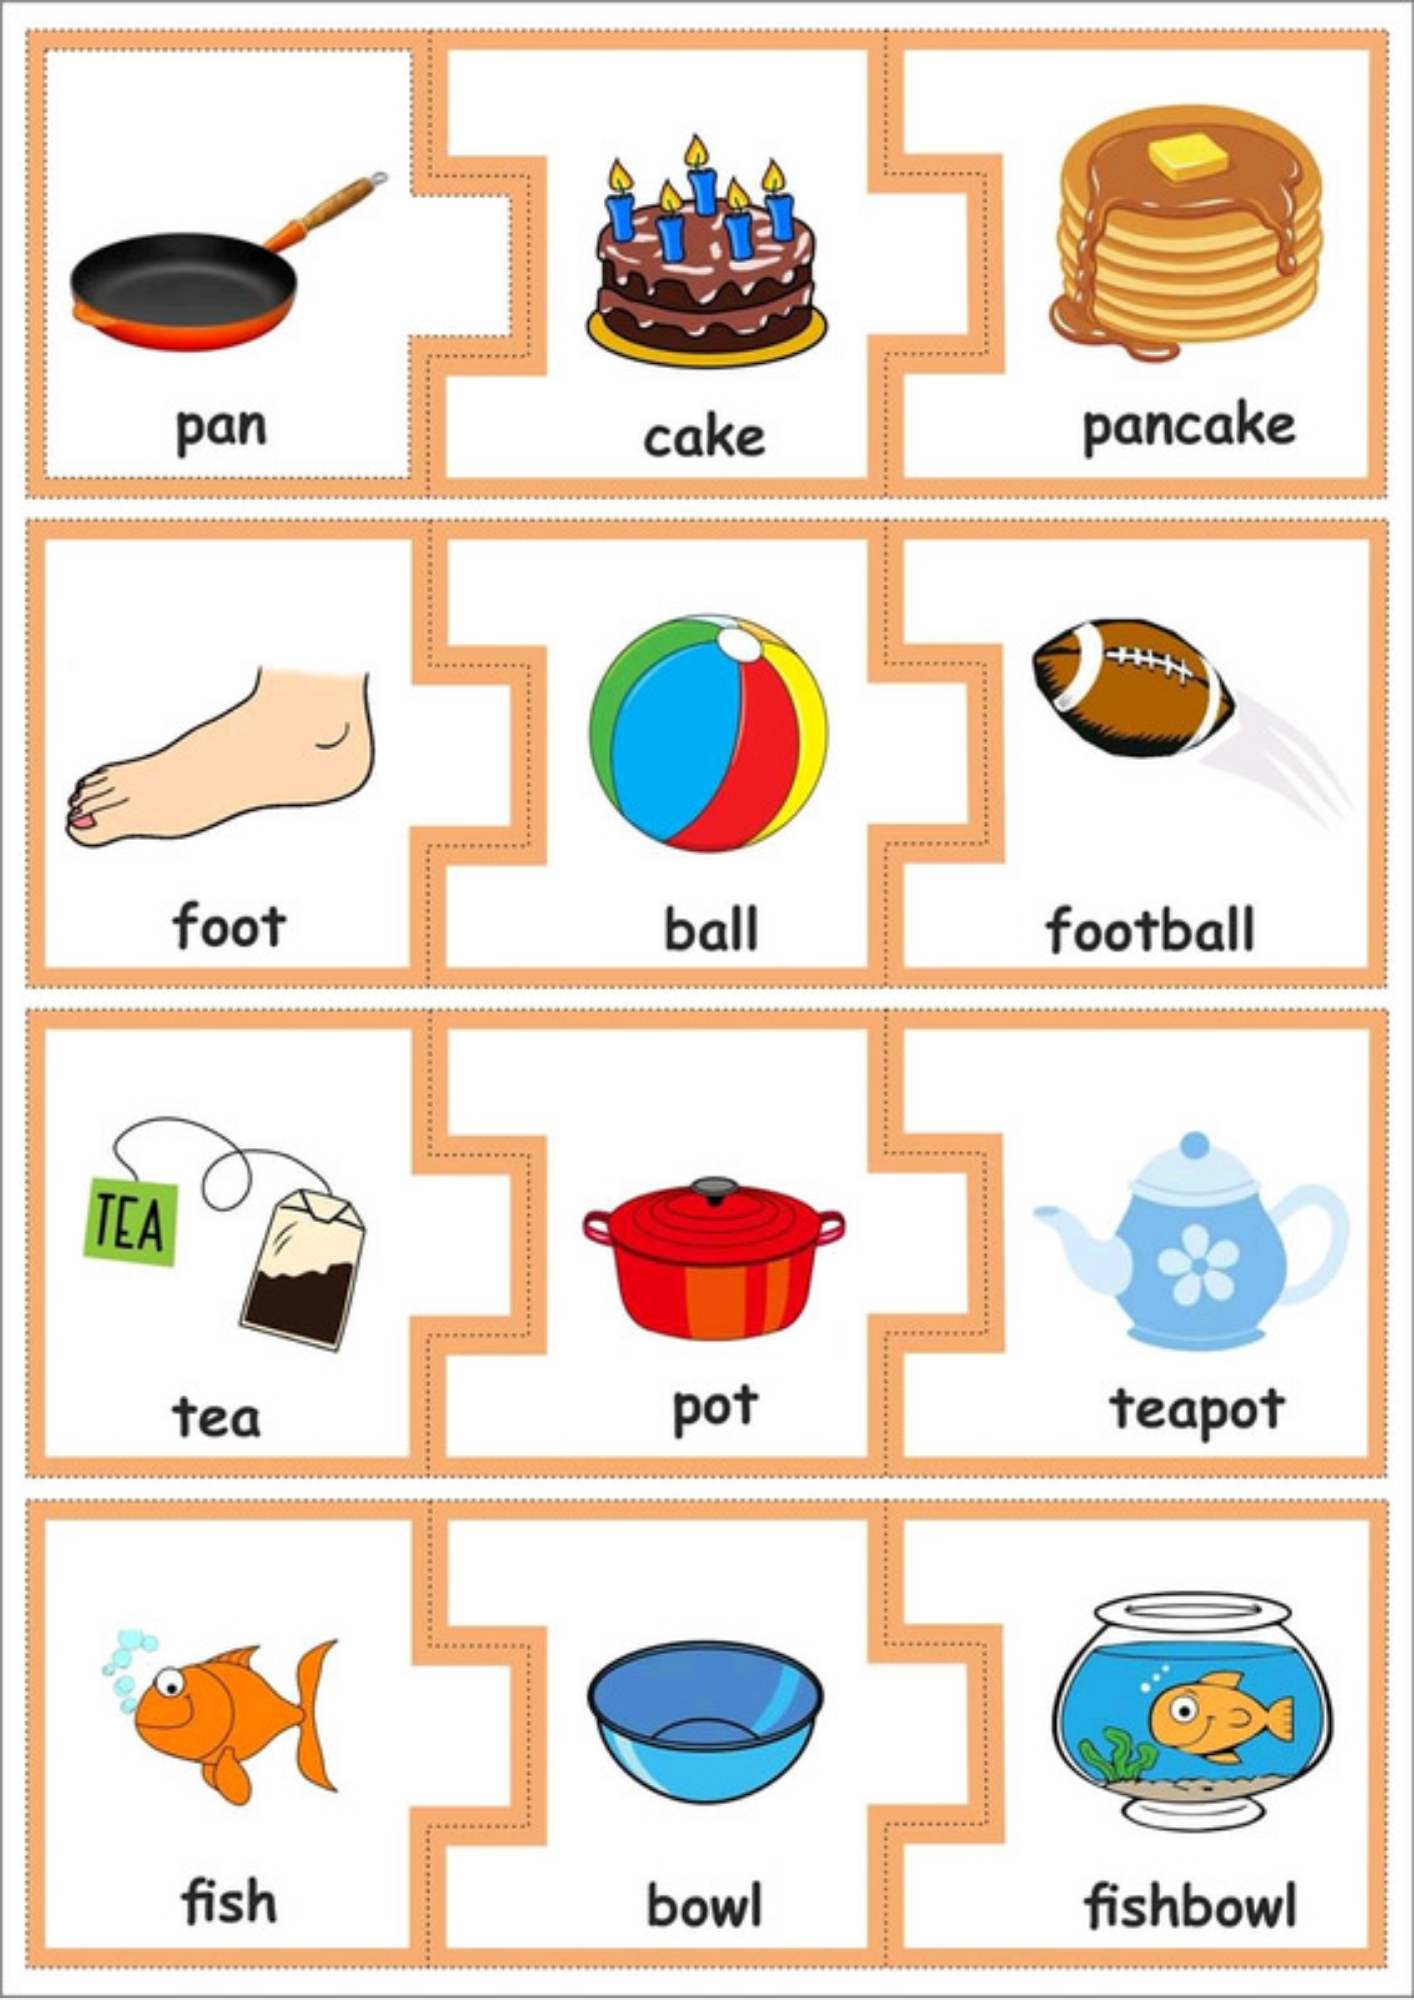 compound-nouns-worksheets-english-created-resources